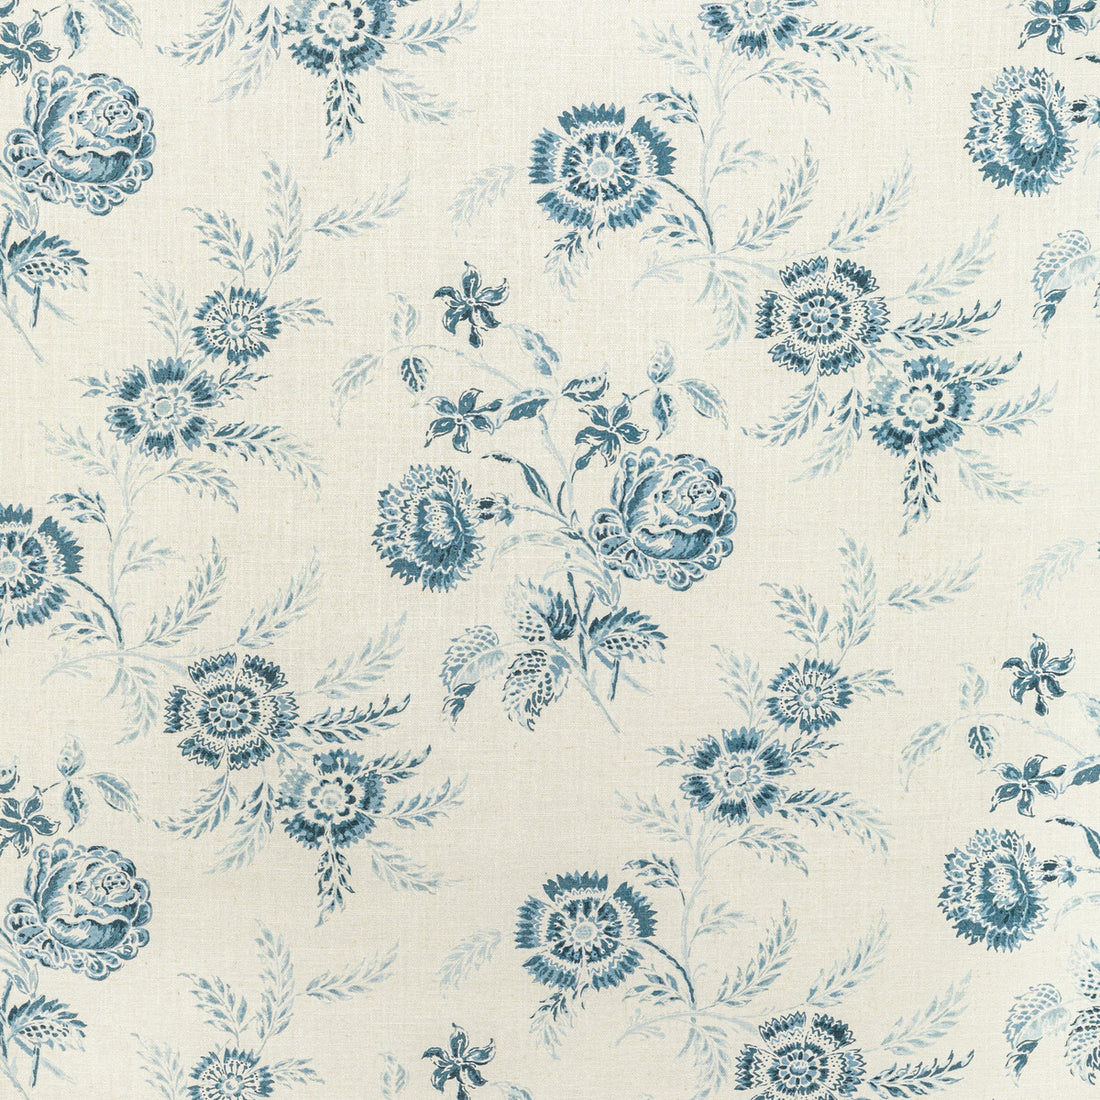 Boutique Floral fabric in blue color - pattern 2022101.15.0 - by Lee Jofa in the Sarah Bartholomew collection